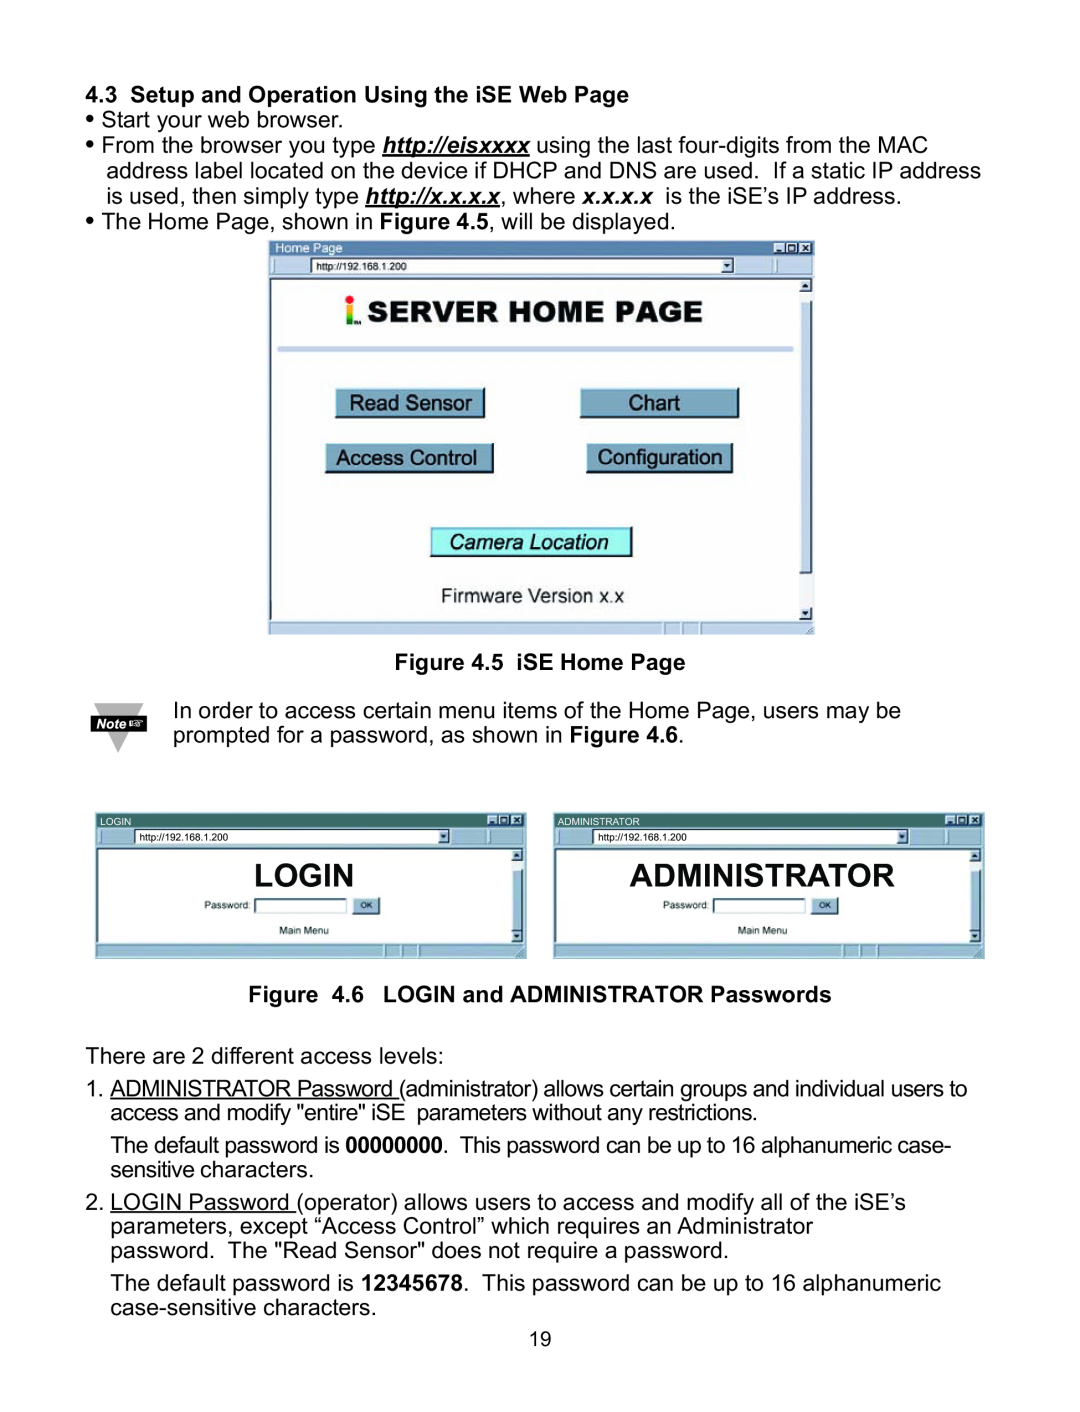 Omega Speaker Systems iSE-TC manual Login, Administrator, 4.3Setup and Operation Using the iSE Web Page, 5 iSE Home Page 